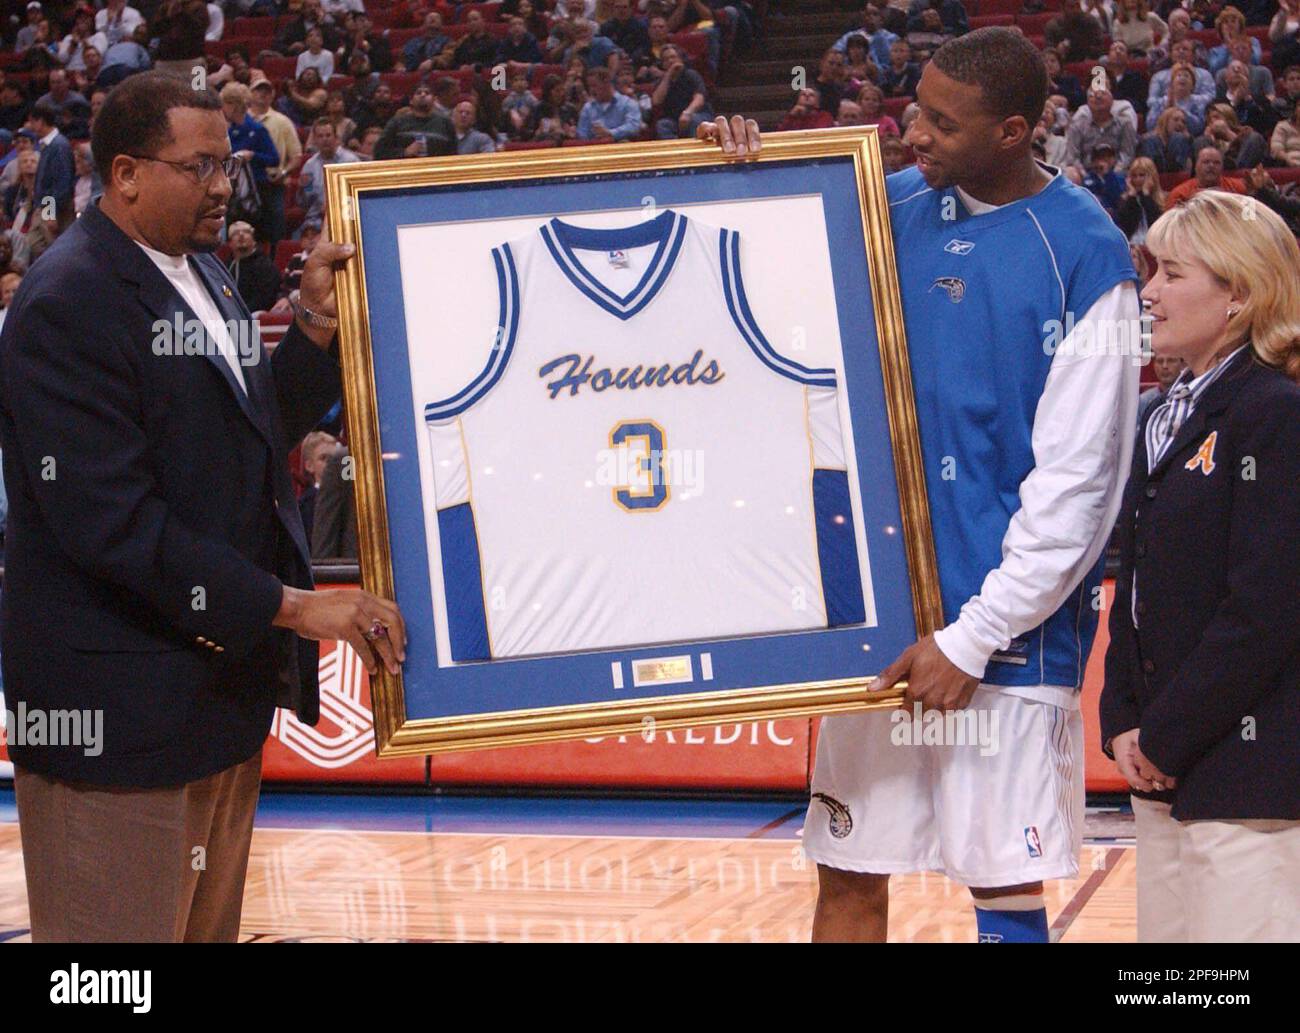 Tracy McGrady, second from right, has his high school basketball jersey  retired in a ceremony during halftime of the Orlando Magic's game against  the New Jersey Nets in Orlando, Fla., Saturday, Jan.